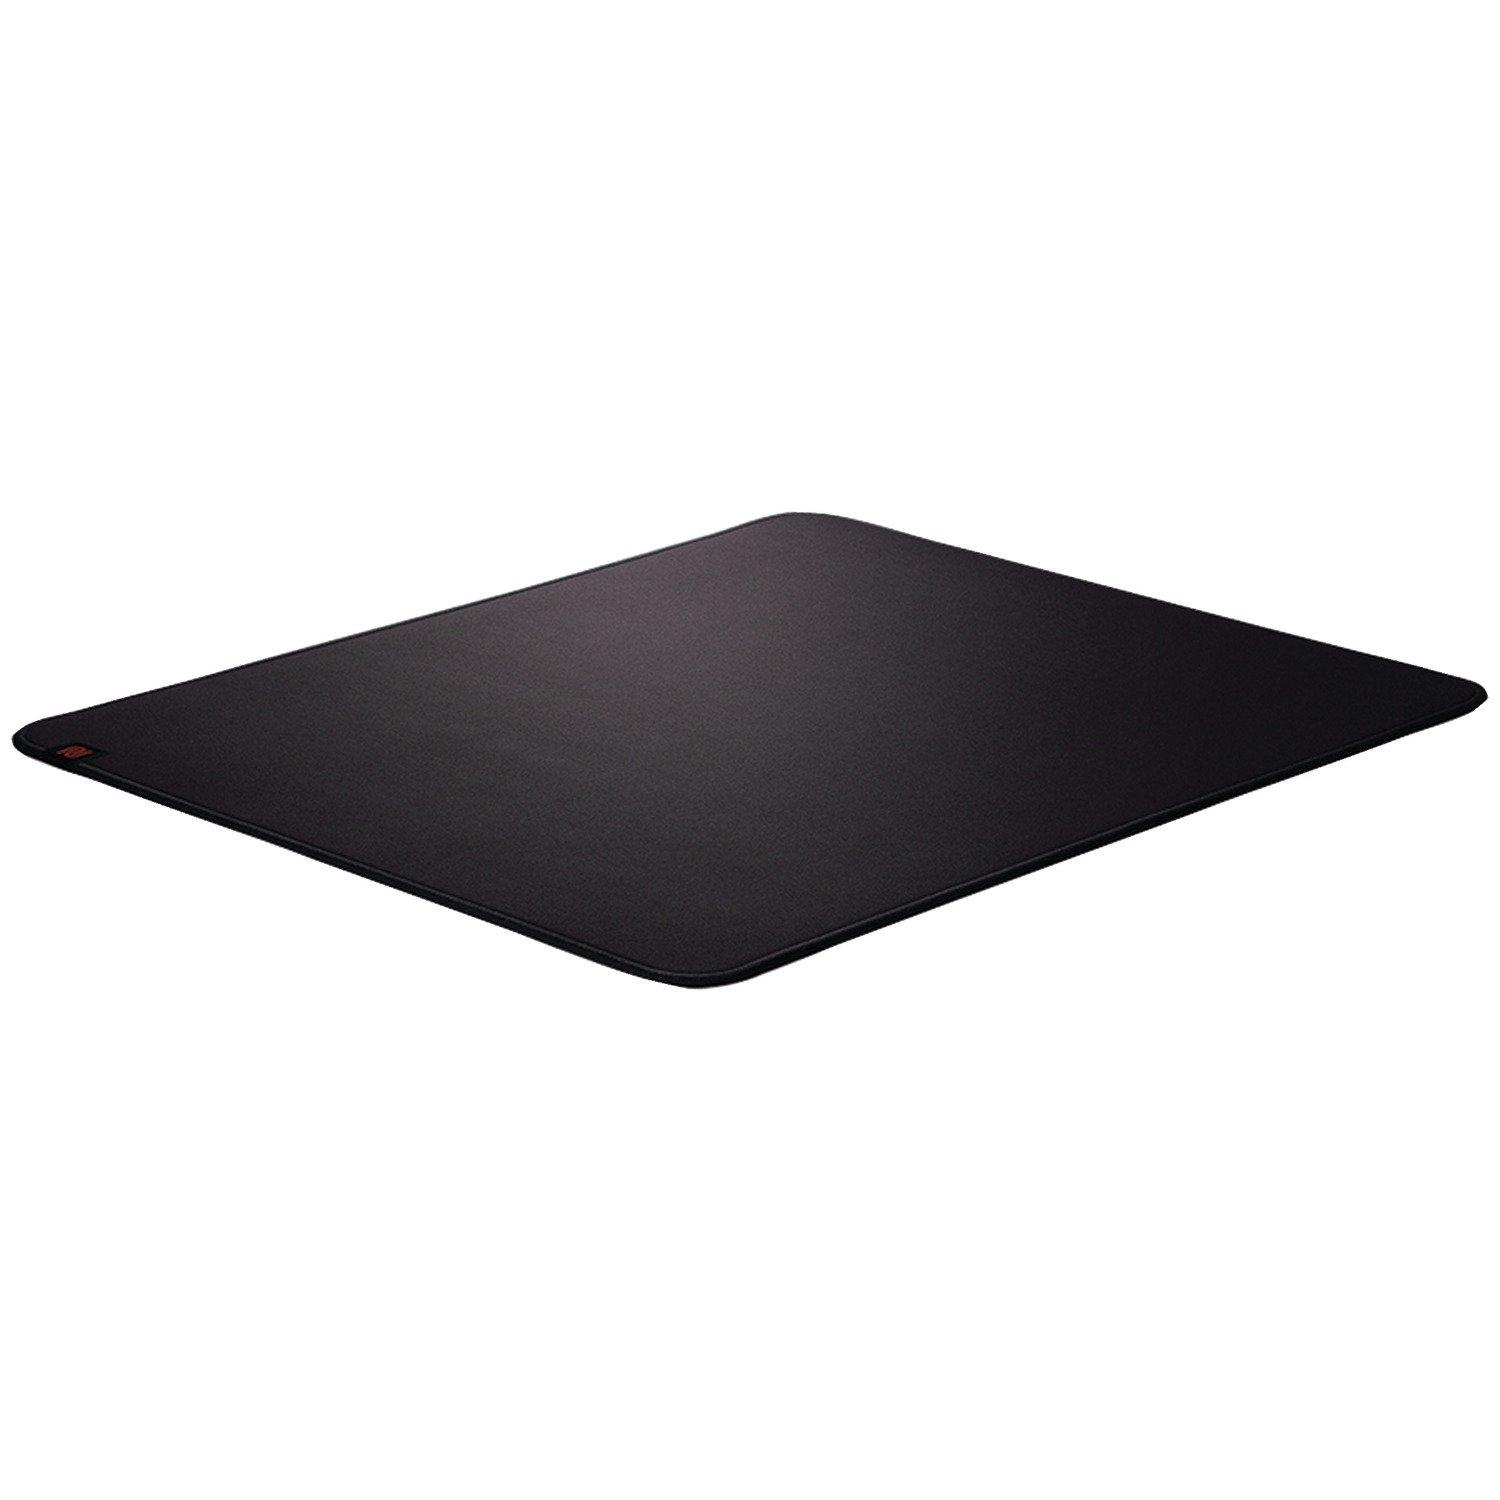 Zowie G Sr Gaming Mouse Pad Pc Gamestop